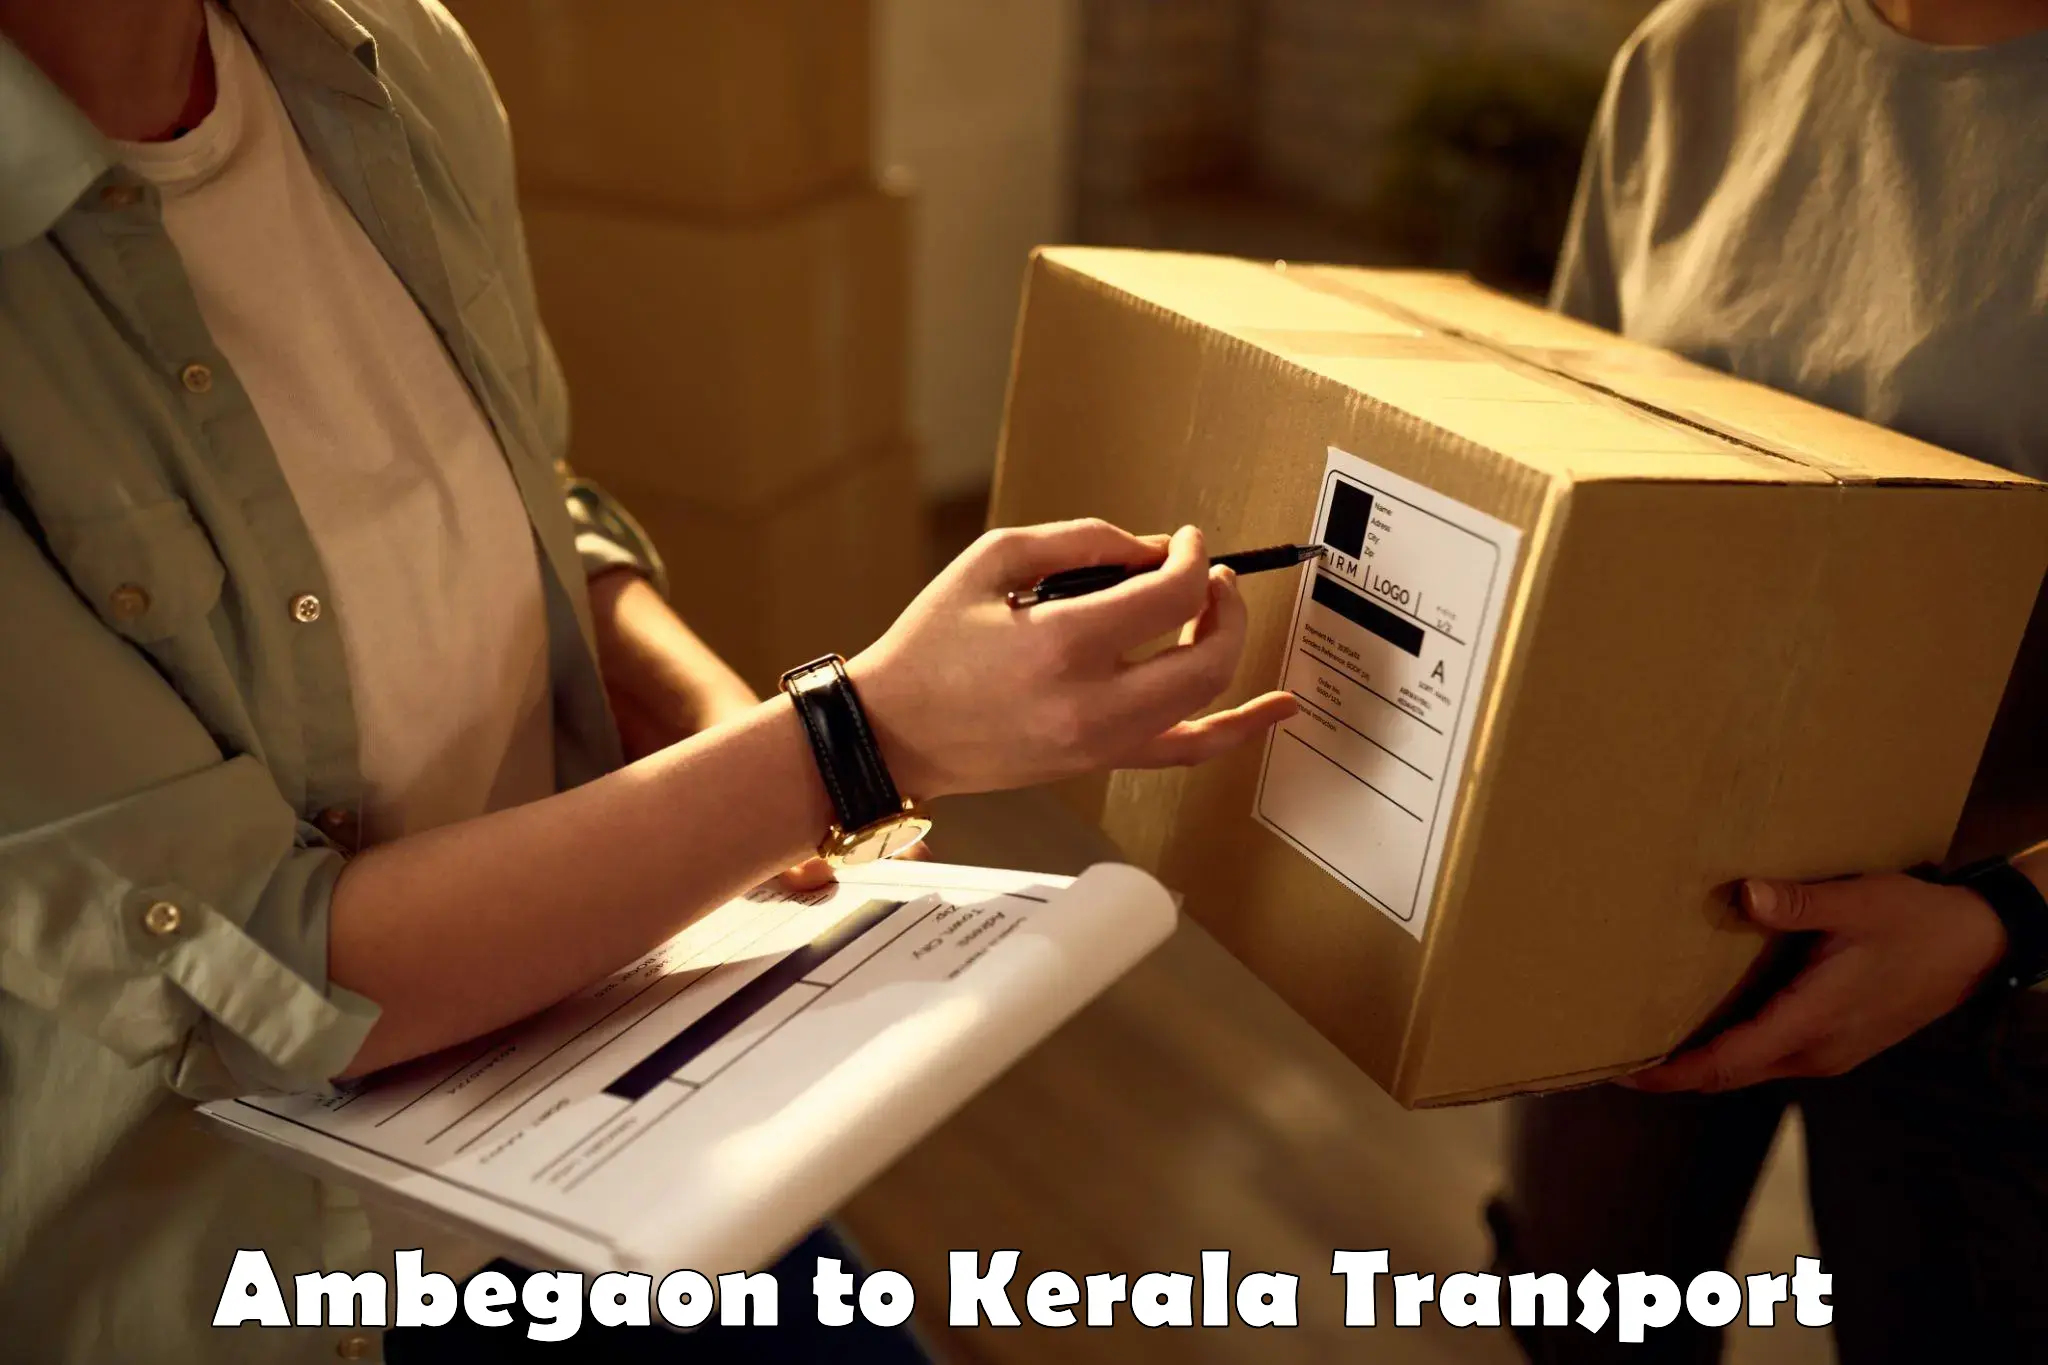 Daily parcel service transport Ambegaon to Perumbavoor